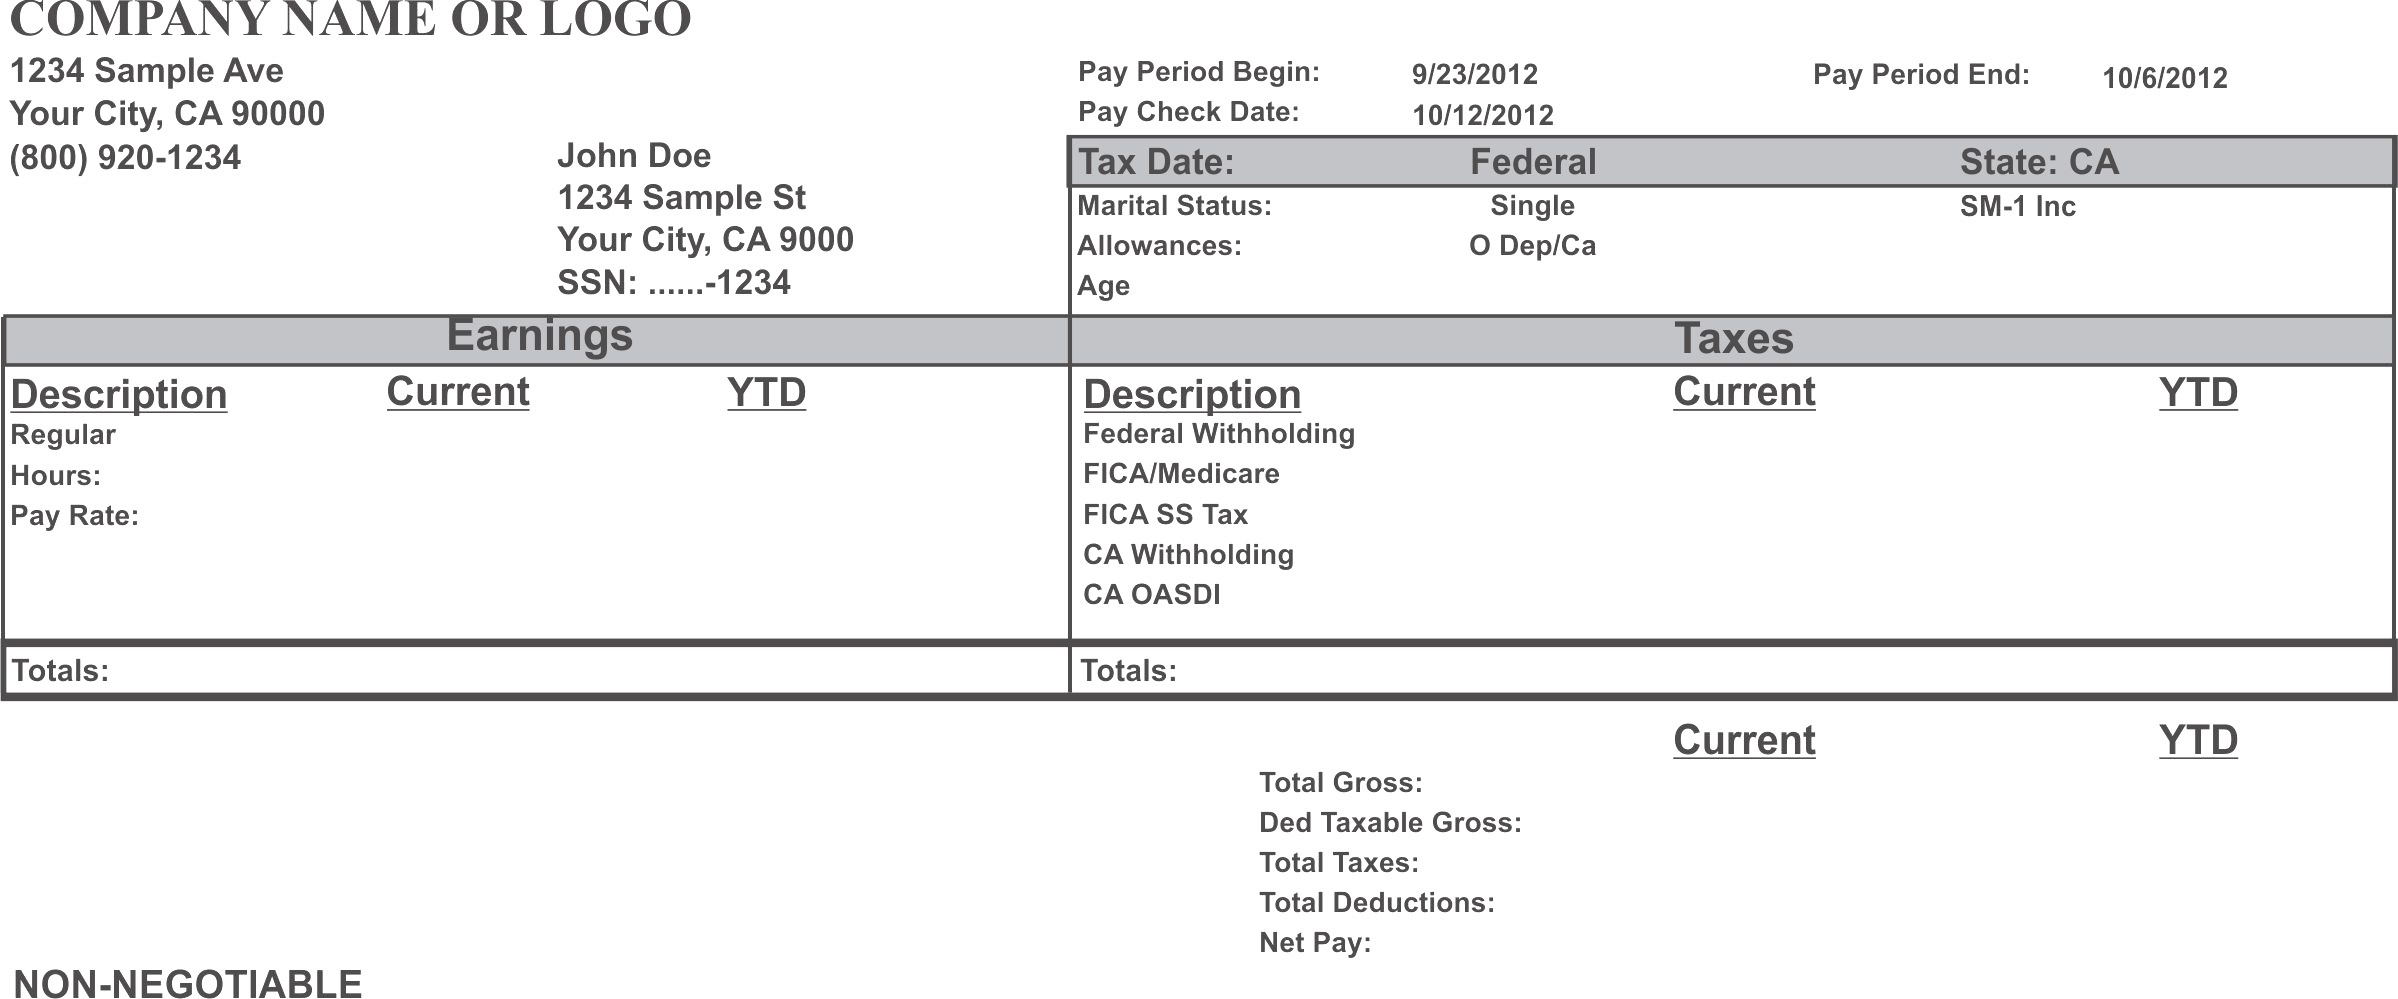 Adp Pay Stub Template Free - Free Printable Pay Stubs Online